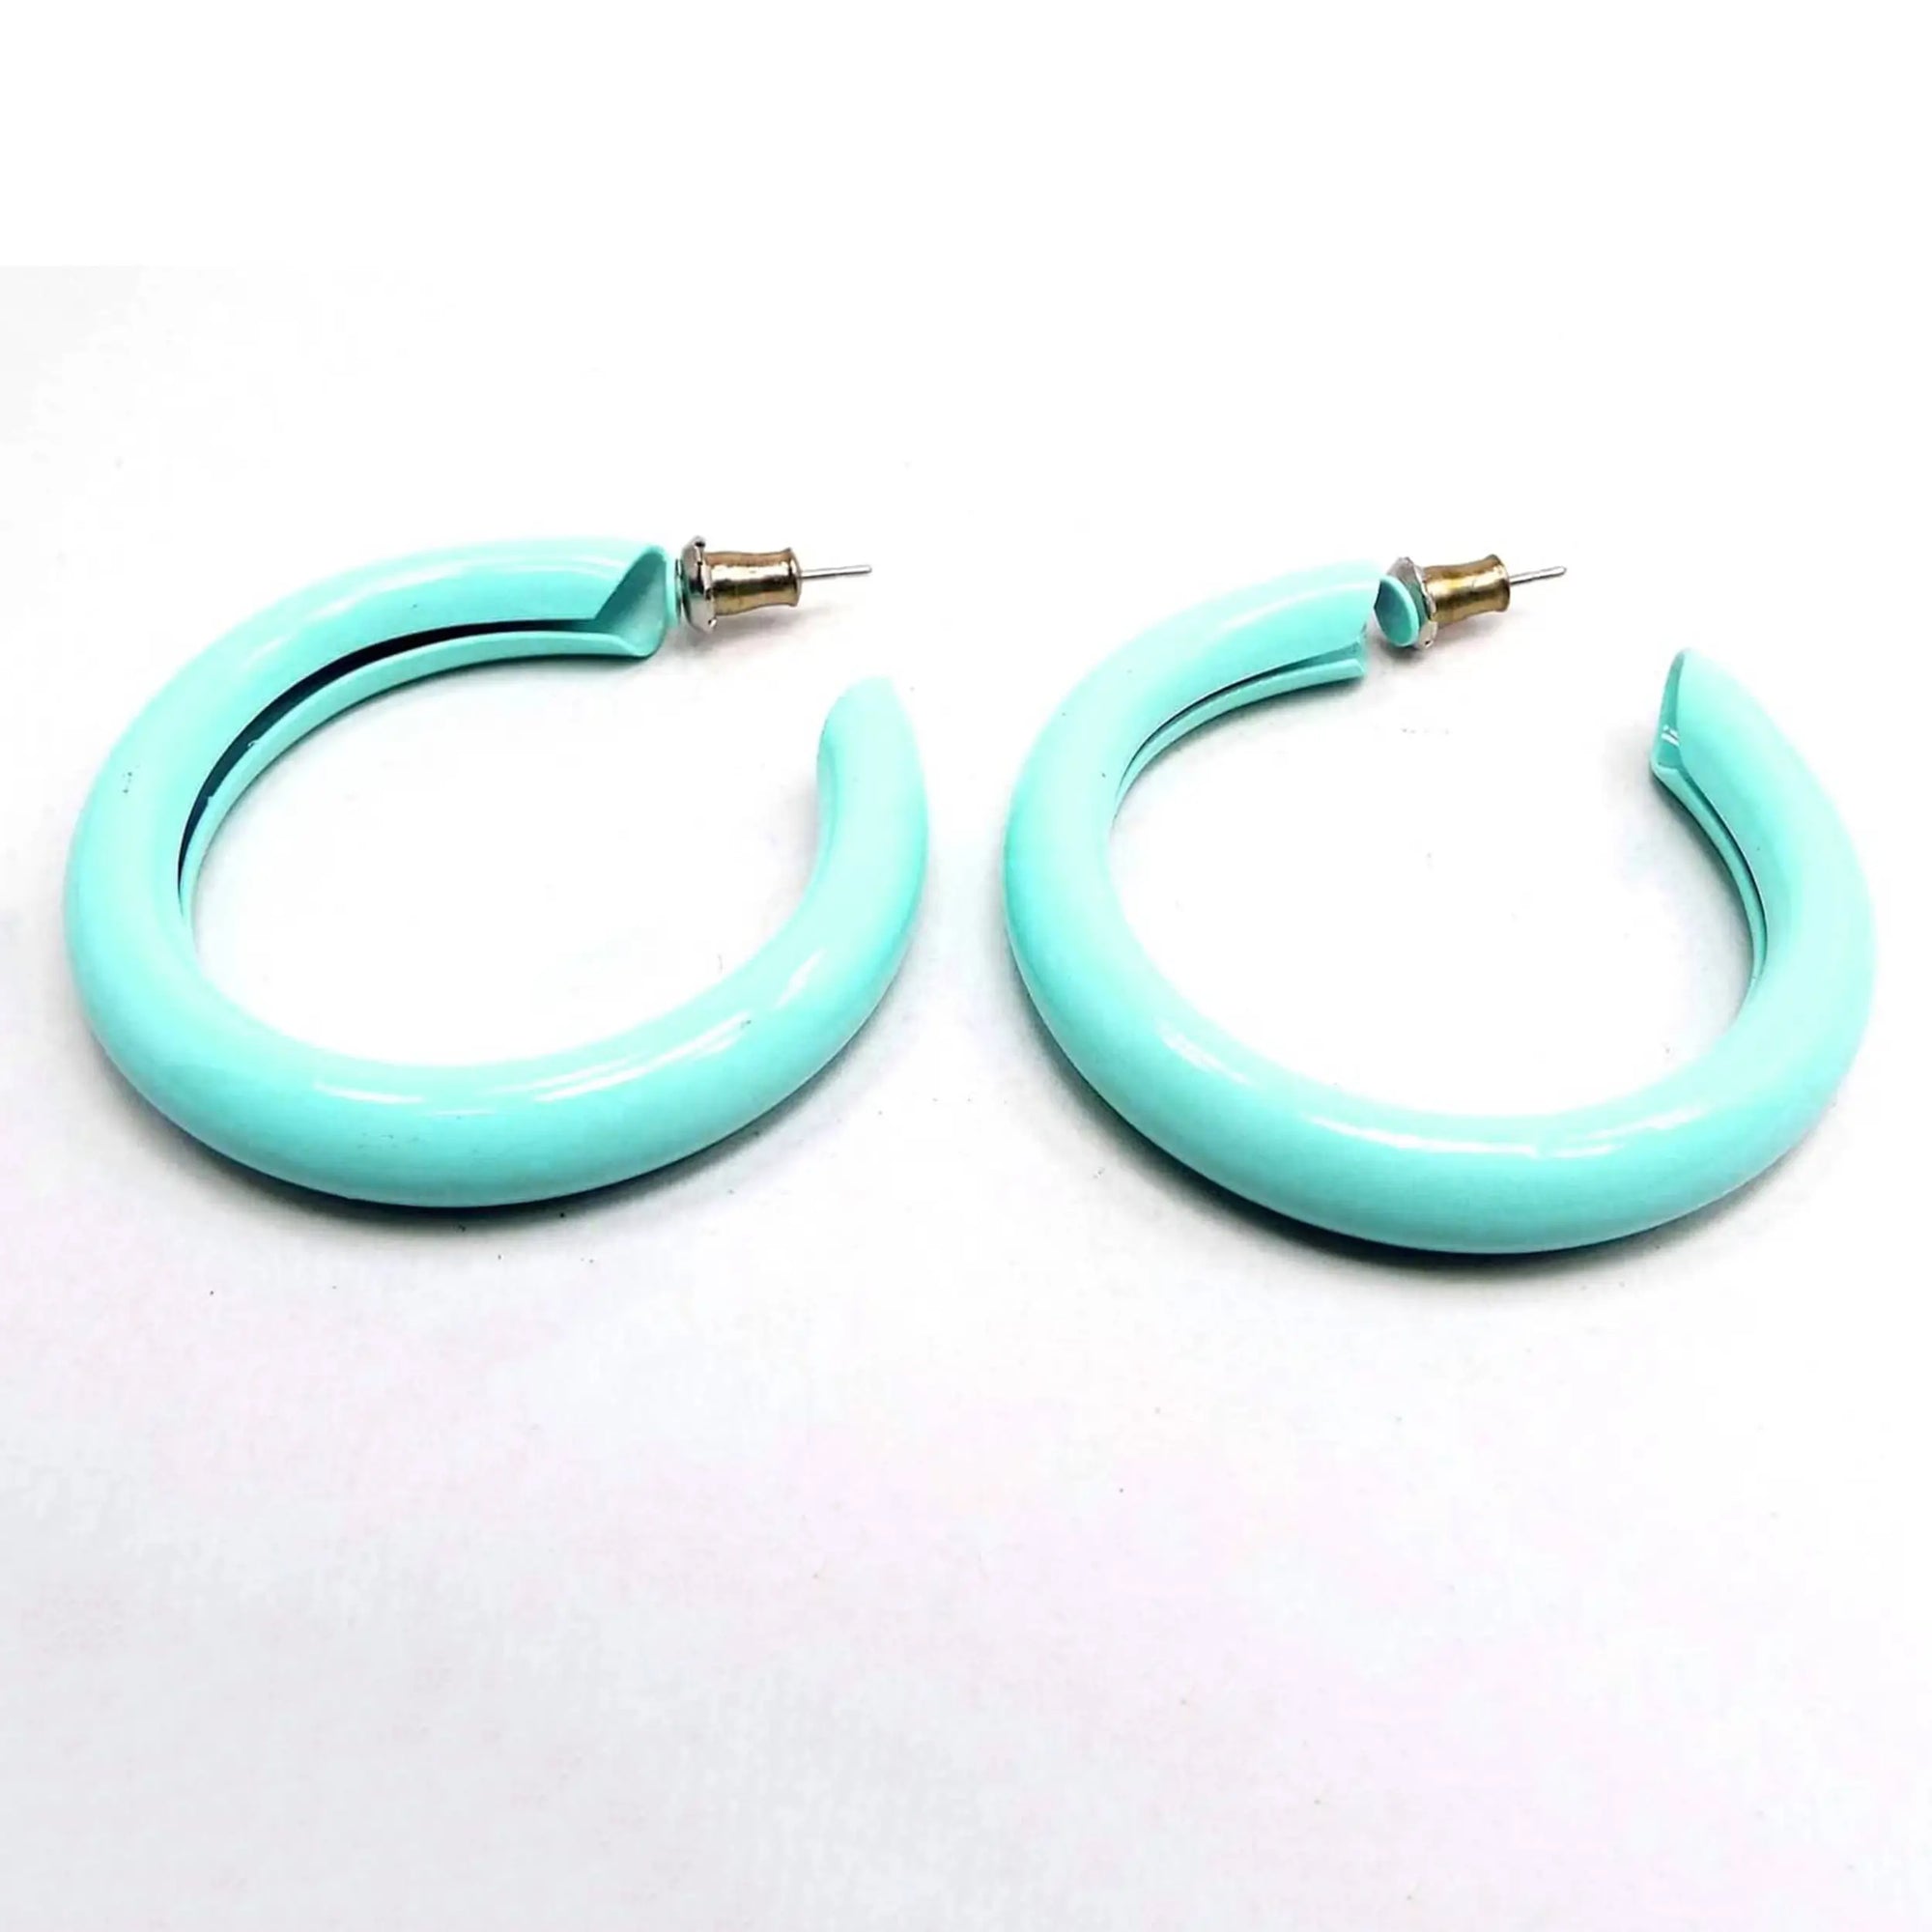 Angled side view of the retro vintage enameled hoop earrings. They are mostly sea foam blue green in color and have post ends with earring clutches attached.